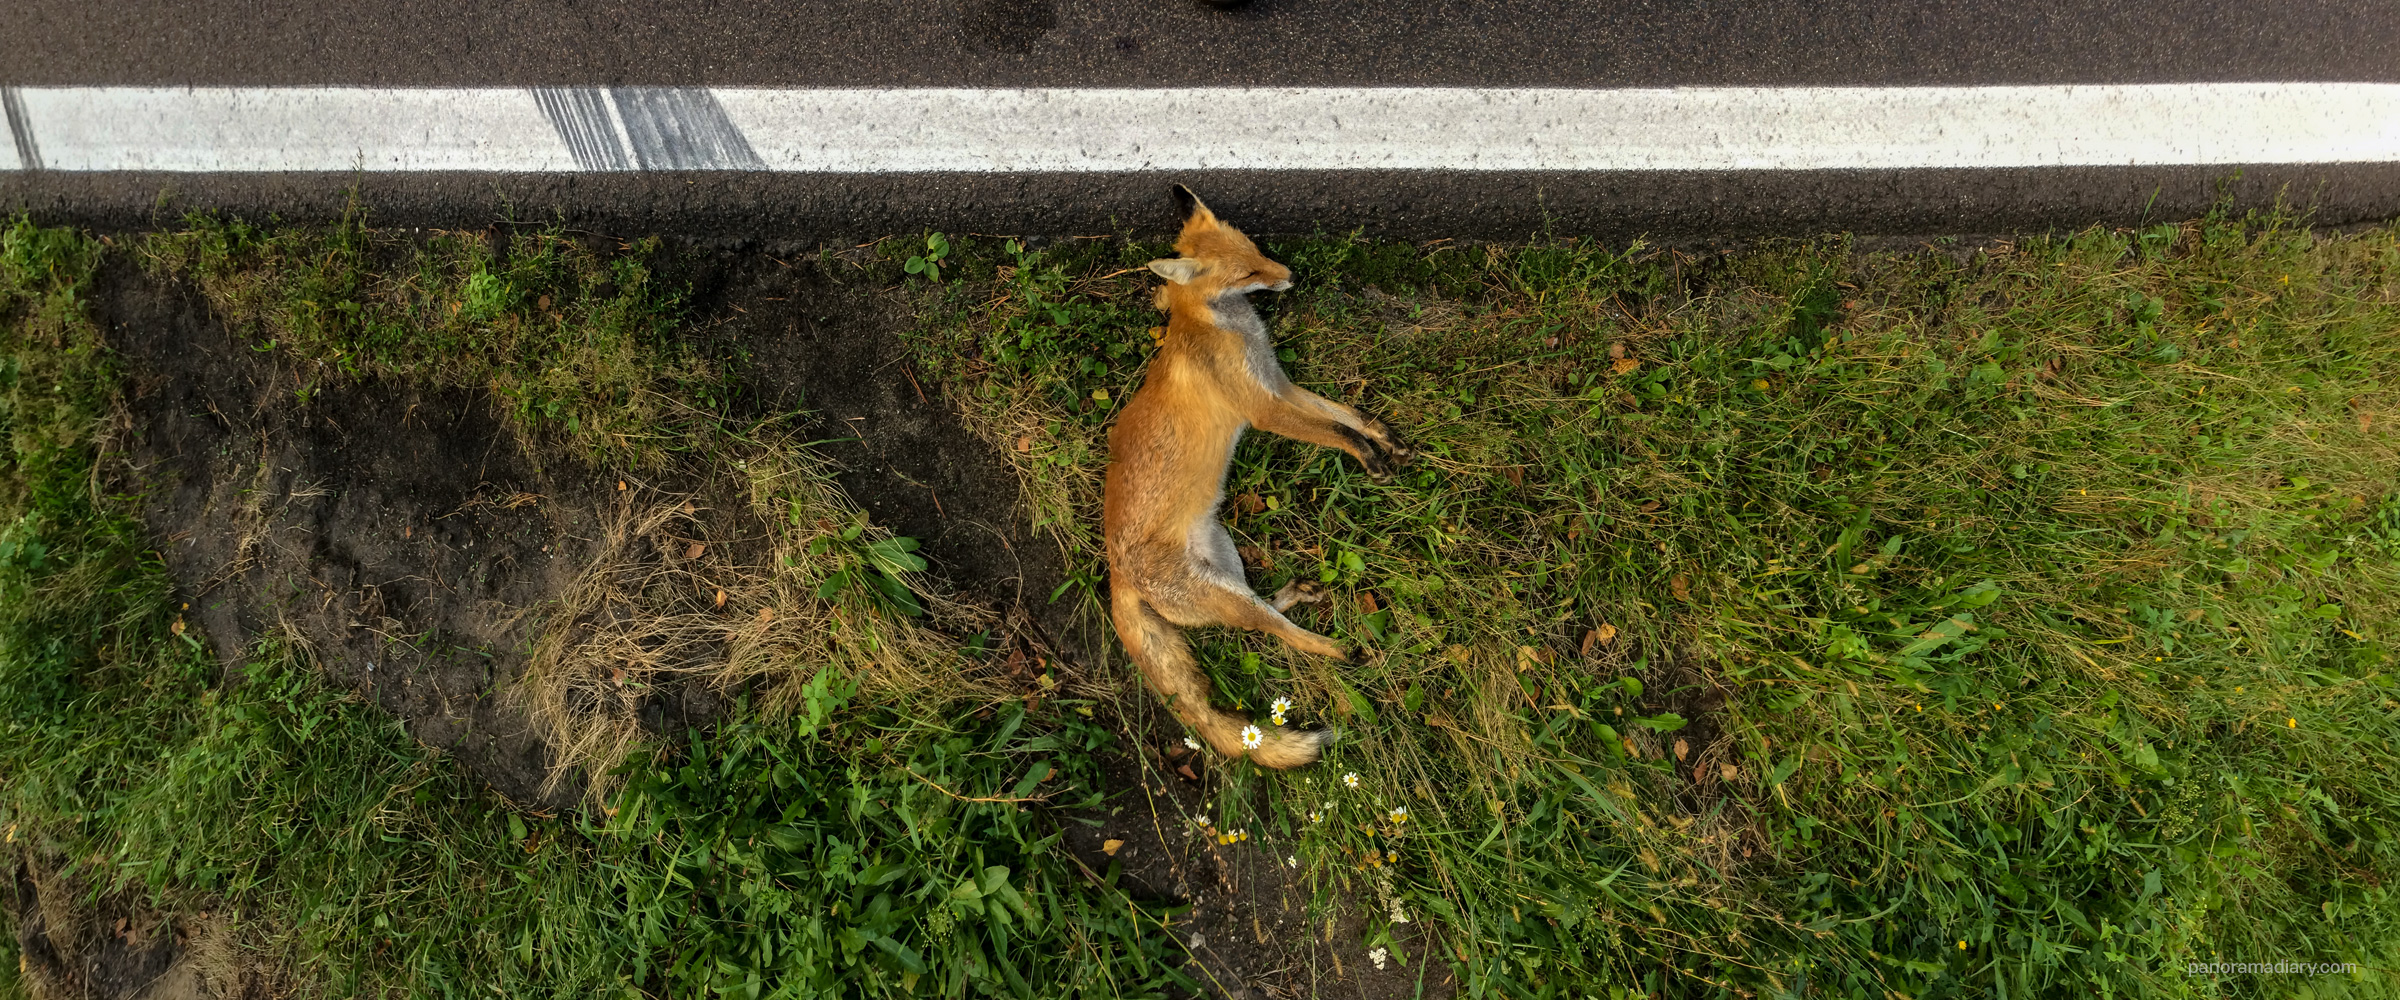 Dead fox by the road | PANORAMA DIARY